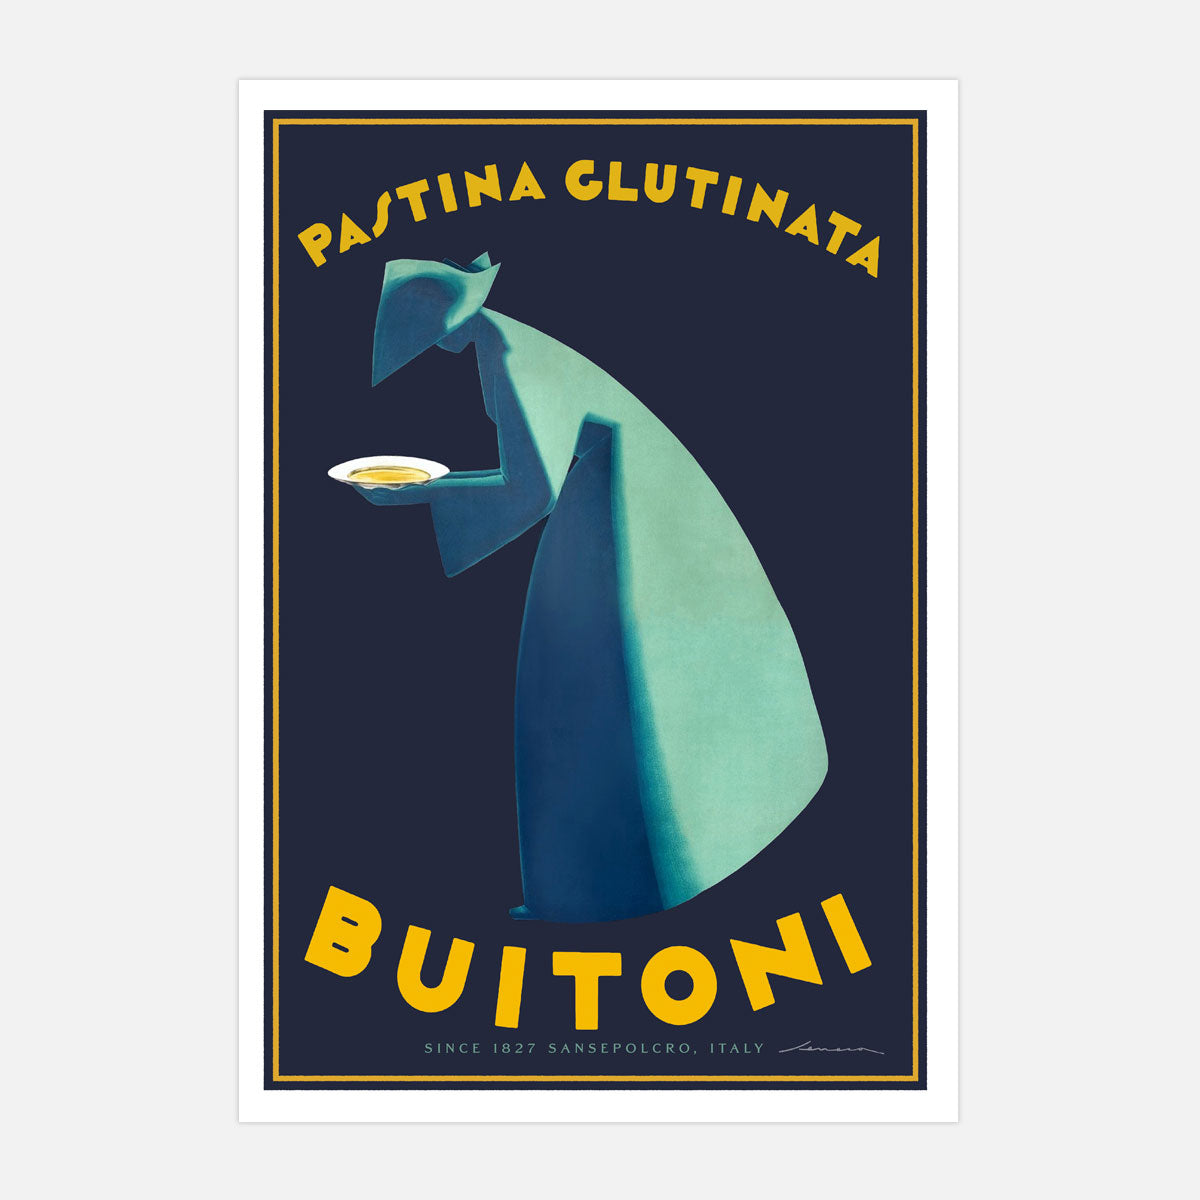 Buitoni Pasta Italy retro vintage print from Places We Luv